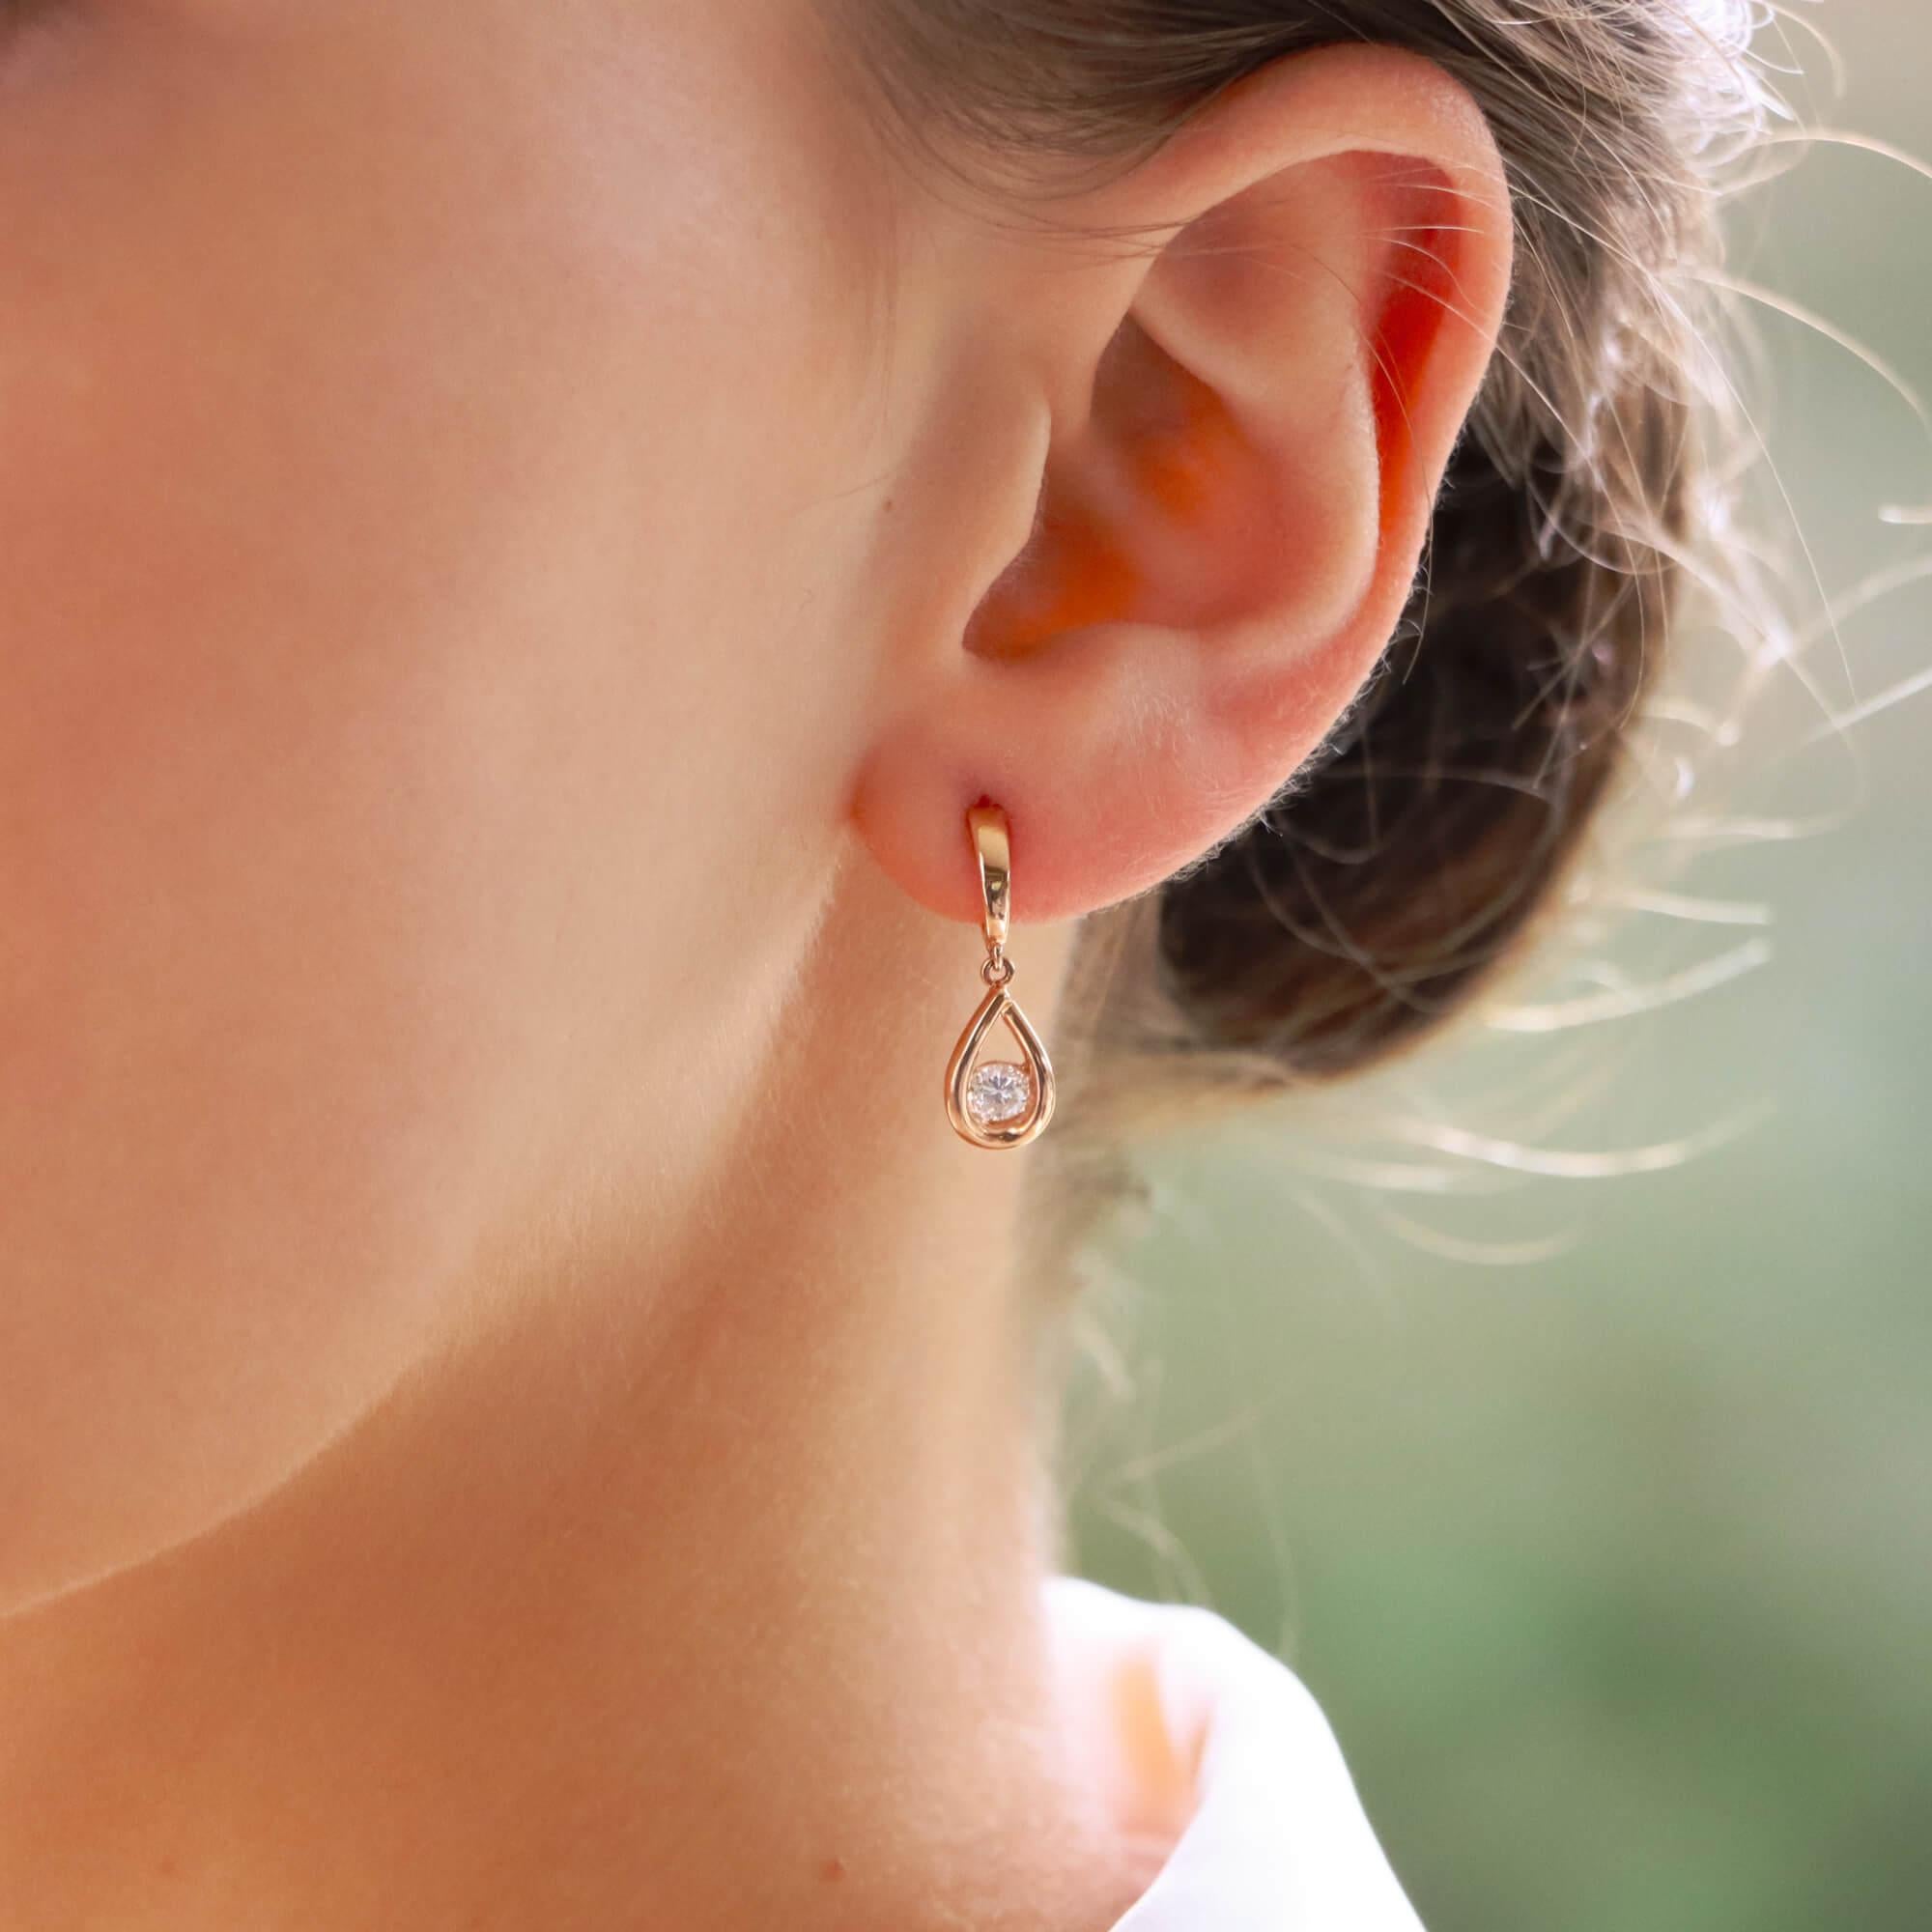 A beautiful pair of contemporary diamond drop earrings set in 14k rose gold.

Each earring is predominately set with a round brilliant cut diamond which is bezel set in a tear drop shaped motif. This tear drop hangs freely from a petite rose gold